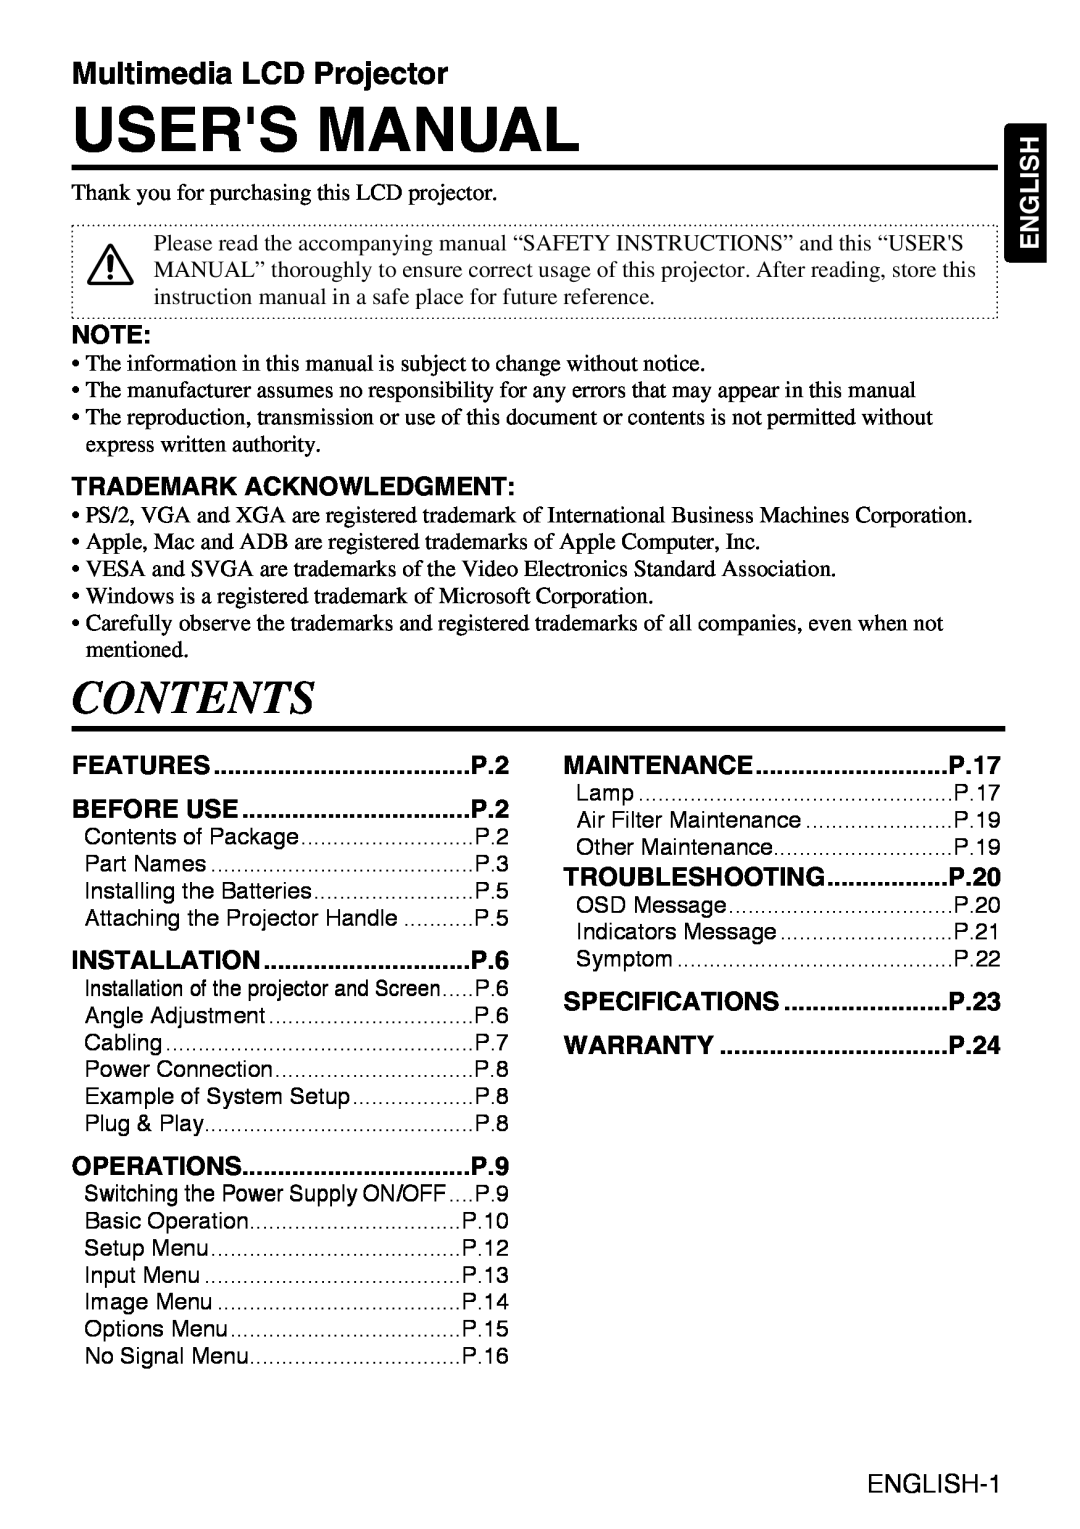 Grundig CP-731i Users Manual, Contents, Trademark Acknowledgment, English, P.17, Troubleshooting, P.23, P.24, Features 